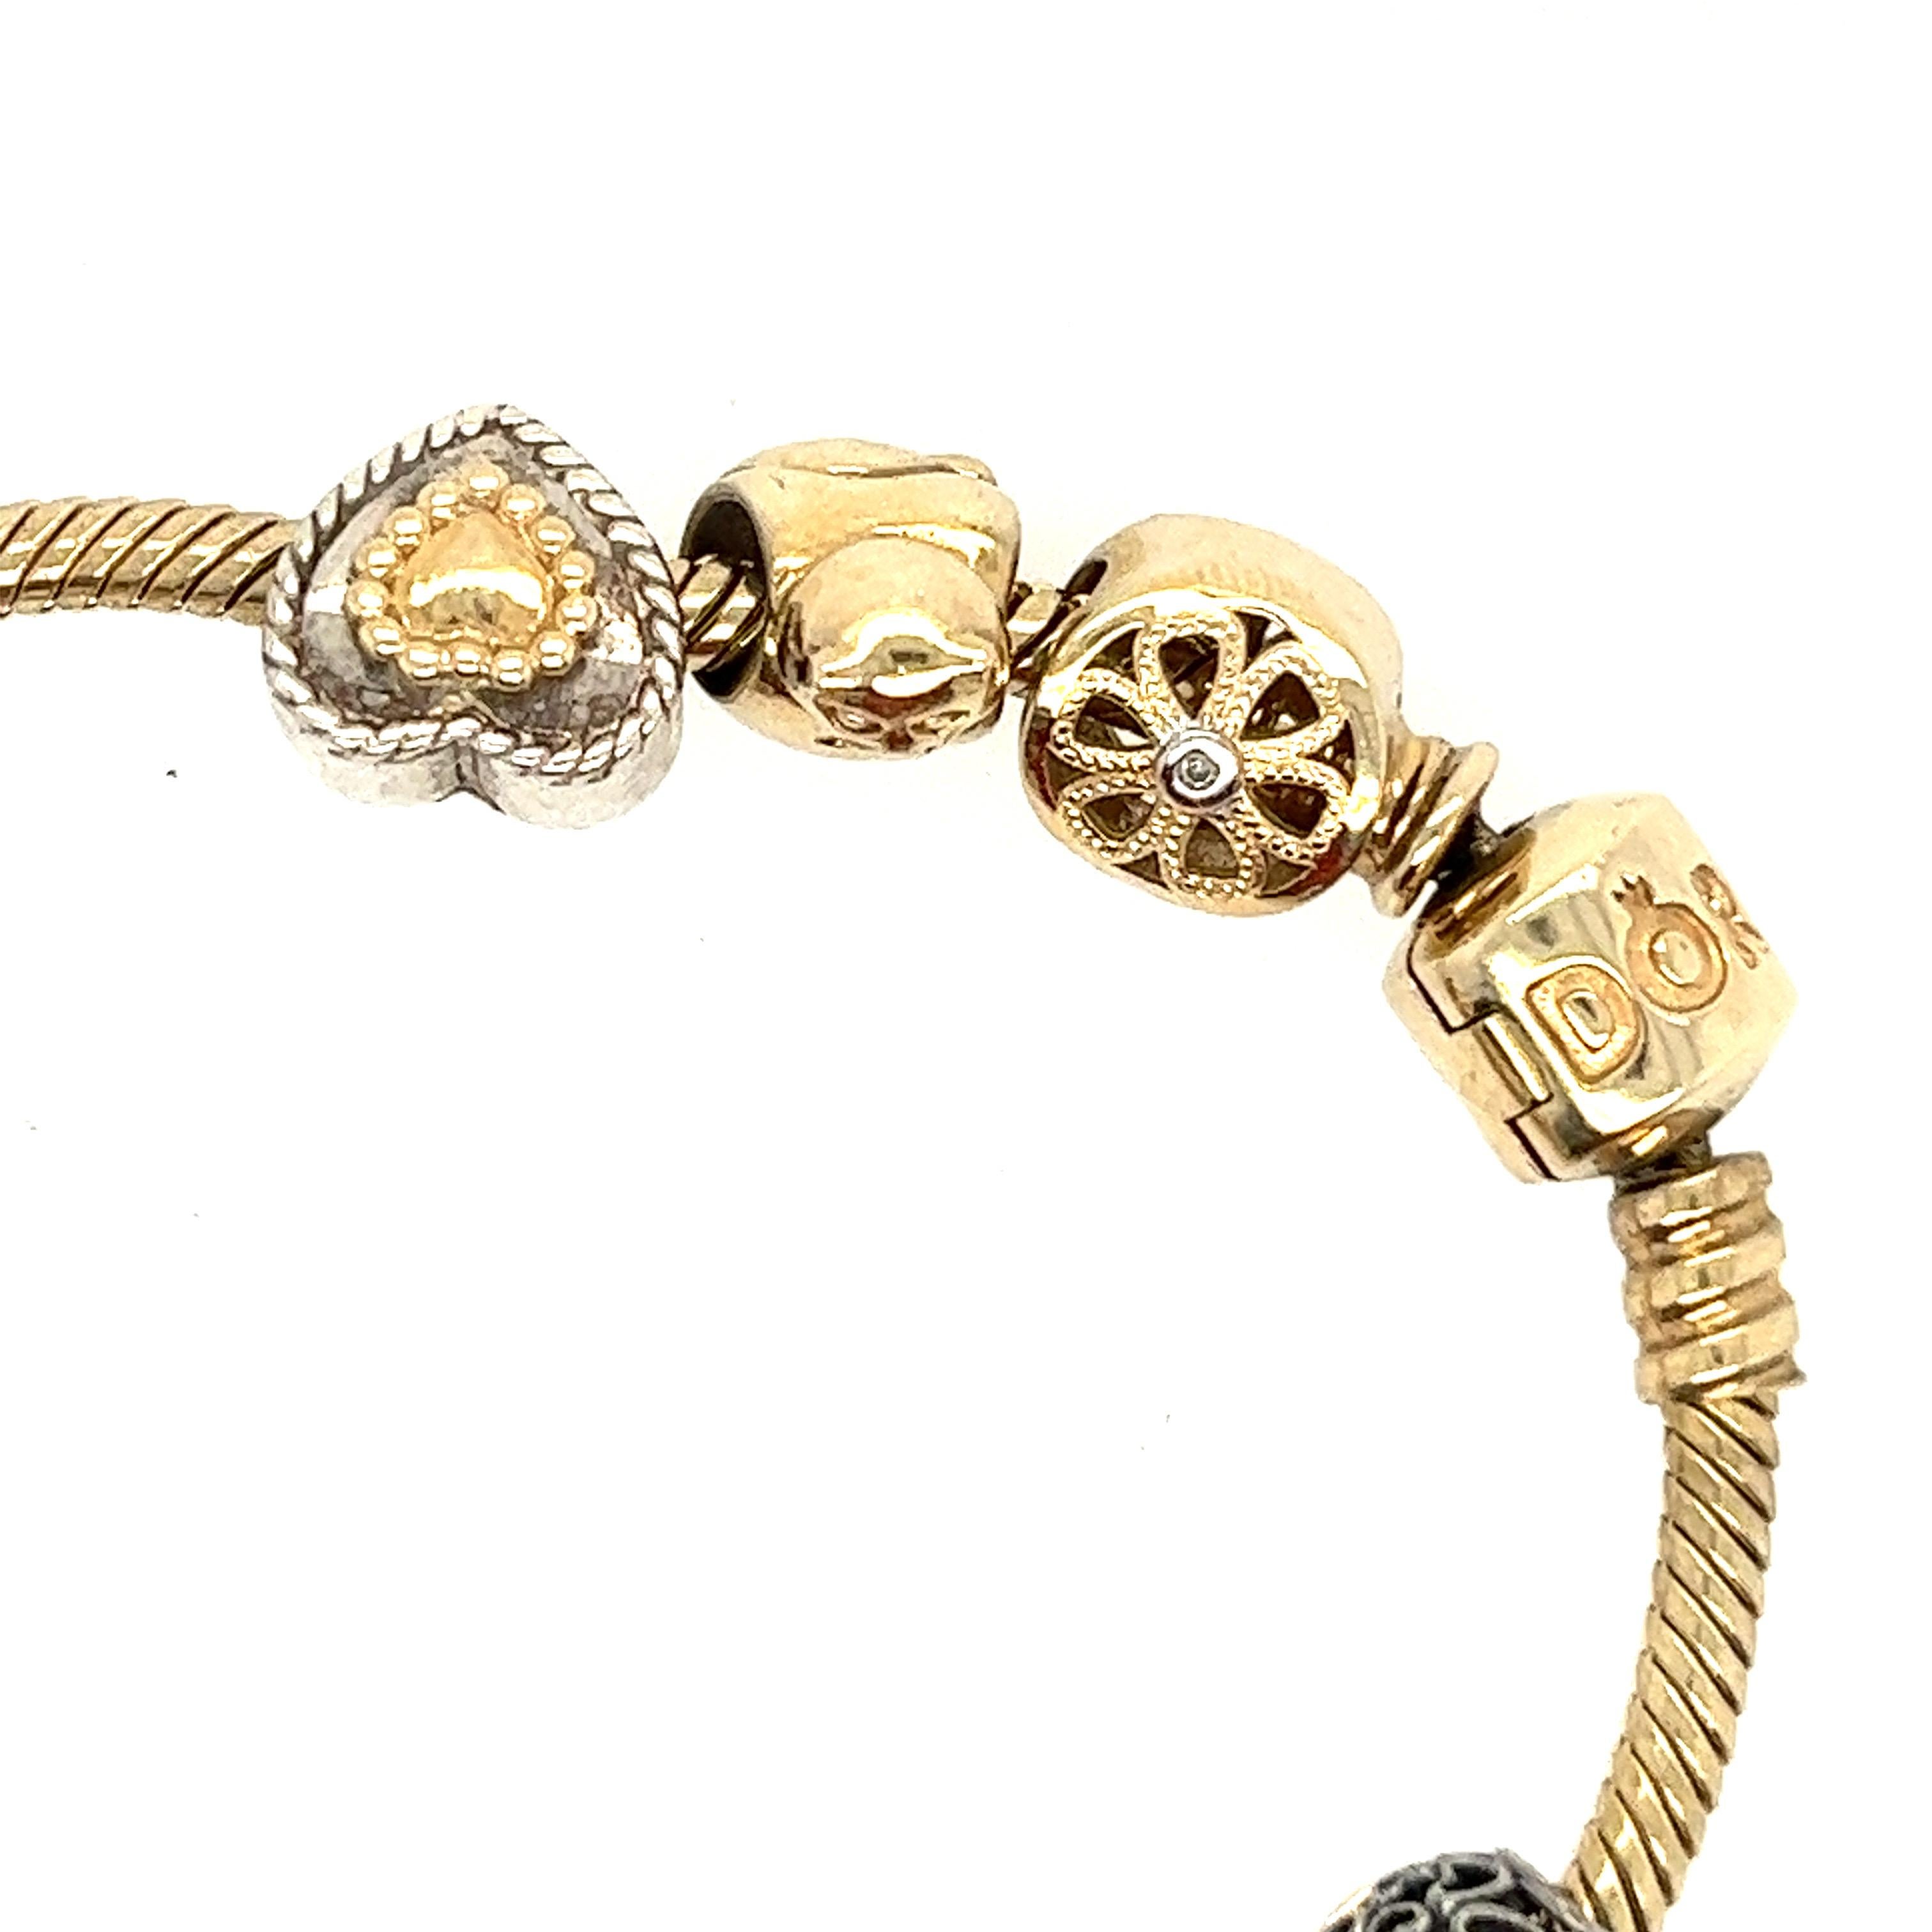 This 14k snake chain charm bracelet is perfect to add to your Pandora collection. It features Pandora' iconic barrel clasp and a threading system allowing you to add charms with ease. Includes bracelet, separators & 10 charms.

Charms include: Gold